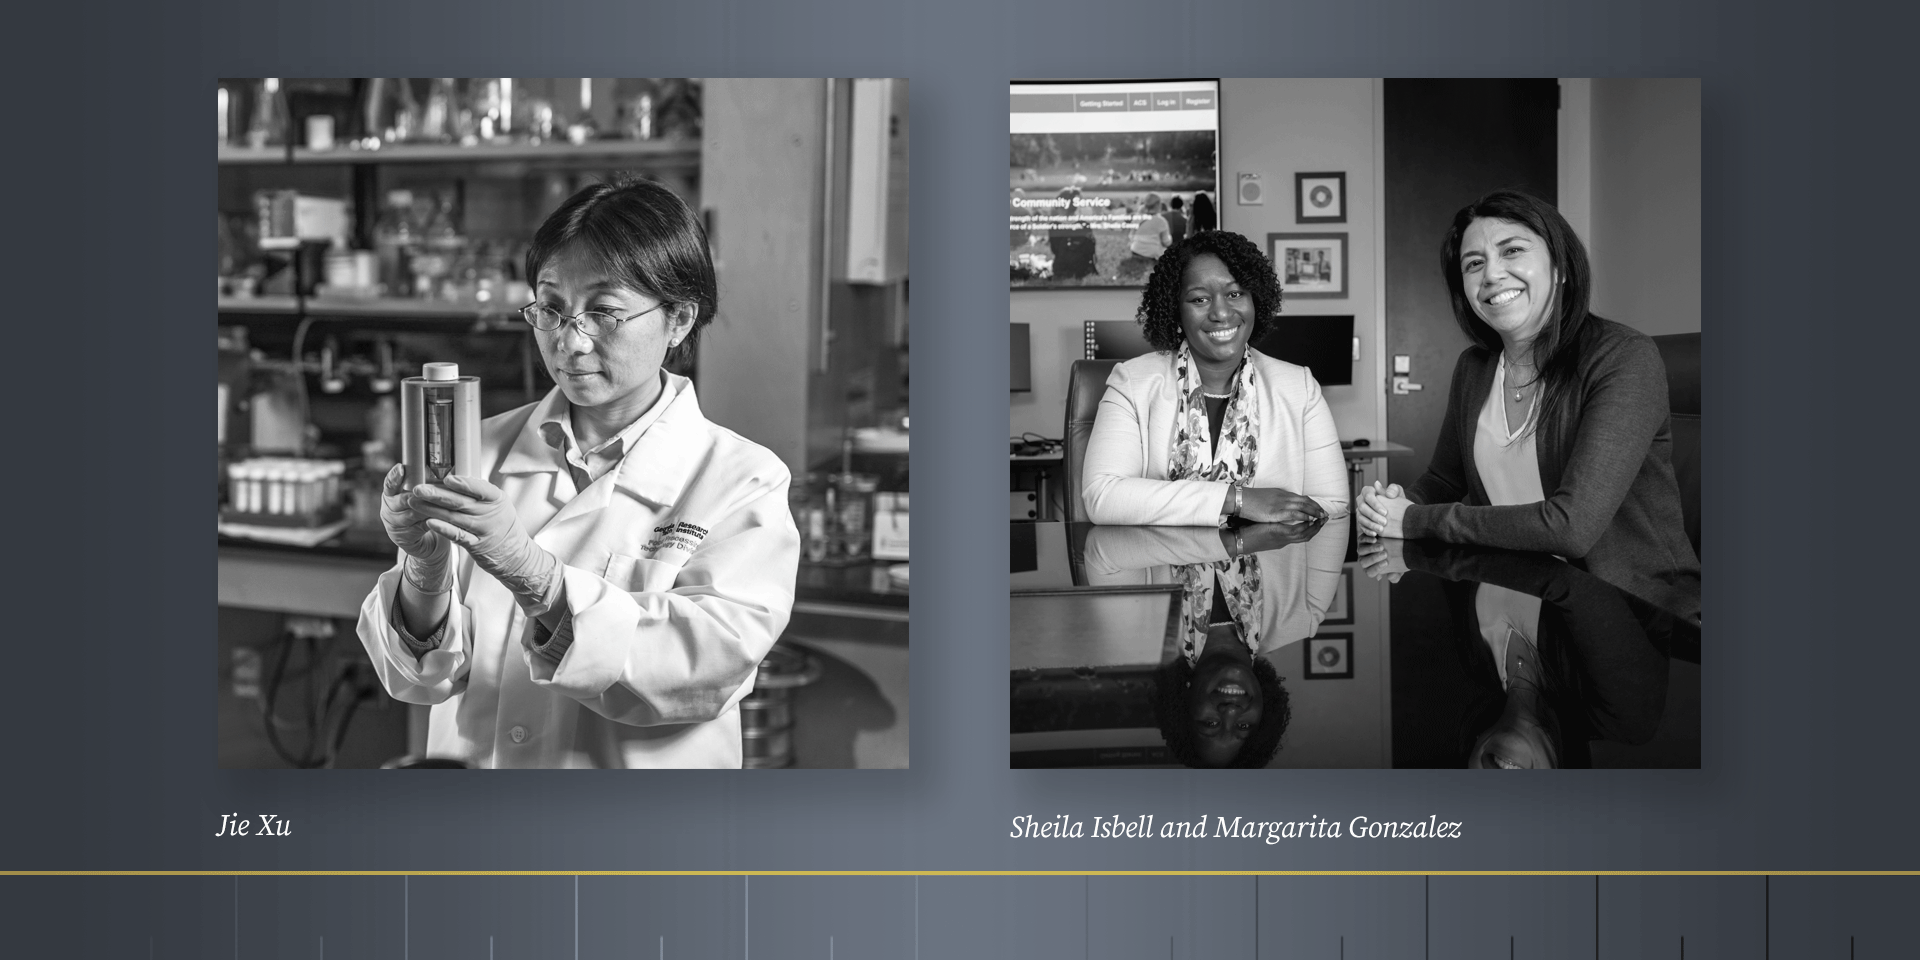 Two black and white photos. Photo on left shows researcher in lab holding up device. Photo on right shows two women seated at a conference room table.